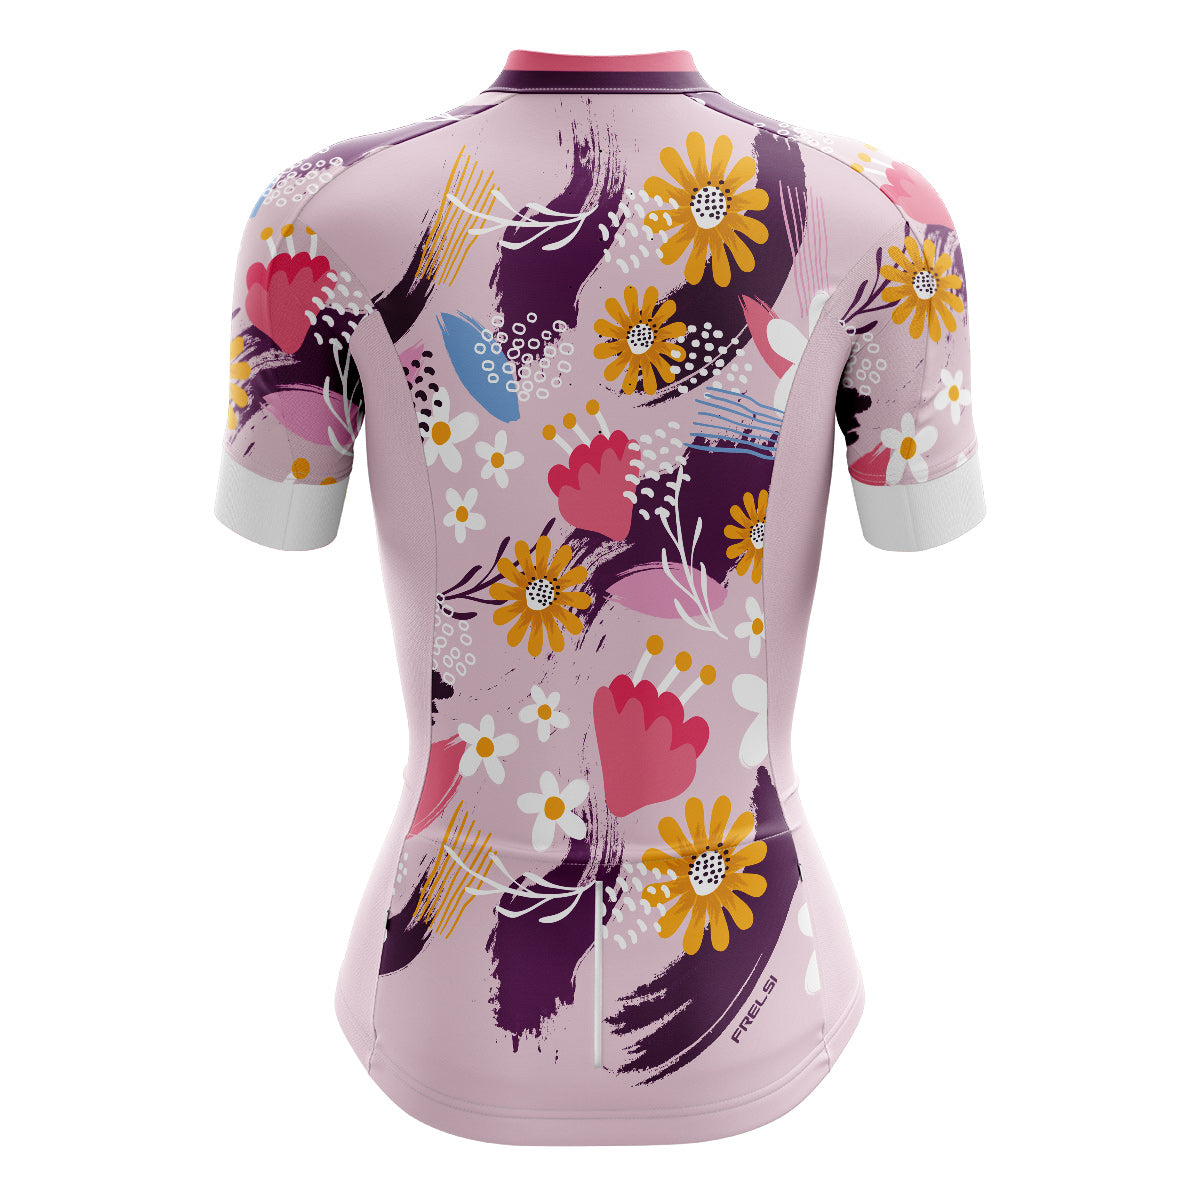 Spring Bloom | Women's Short Sleeve Cycling Jersey